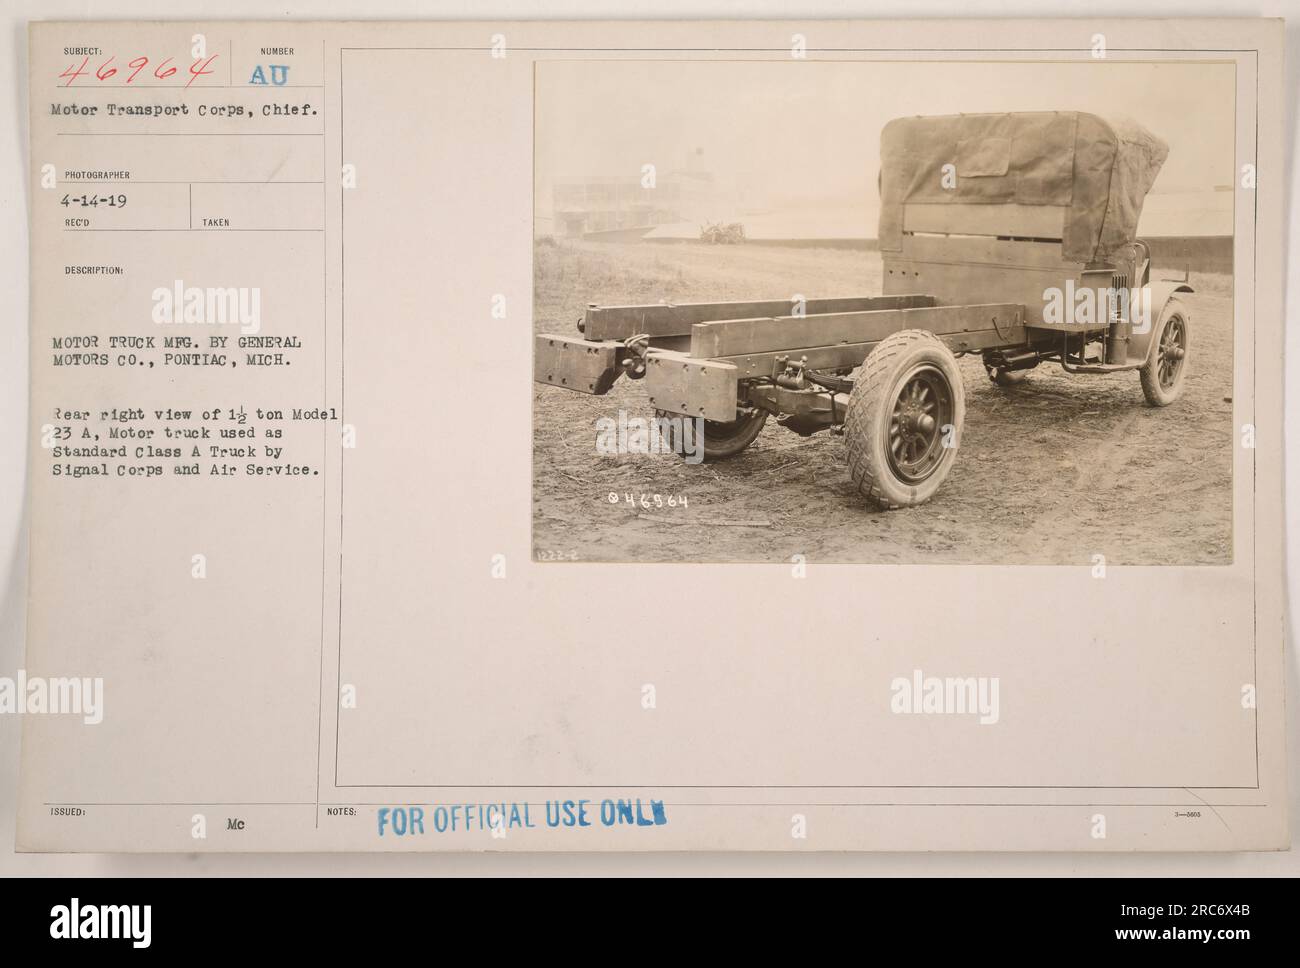 Rear right view of a 1 1/2 ton, Model 23 A truck manufactured by General Motors Co. in Pontiac, Michigan. This truck was used as the Standard Class A truck by the Signal Corps and Air Service during World War I. Photograph taken on April 14, 1919, and the description was received and issued by the Motor Transport Corps. Official use only. Stock Photo